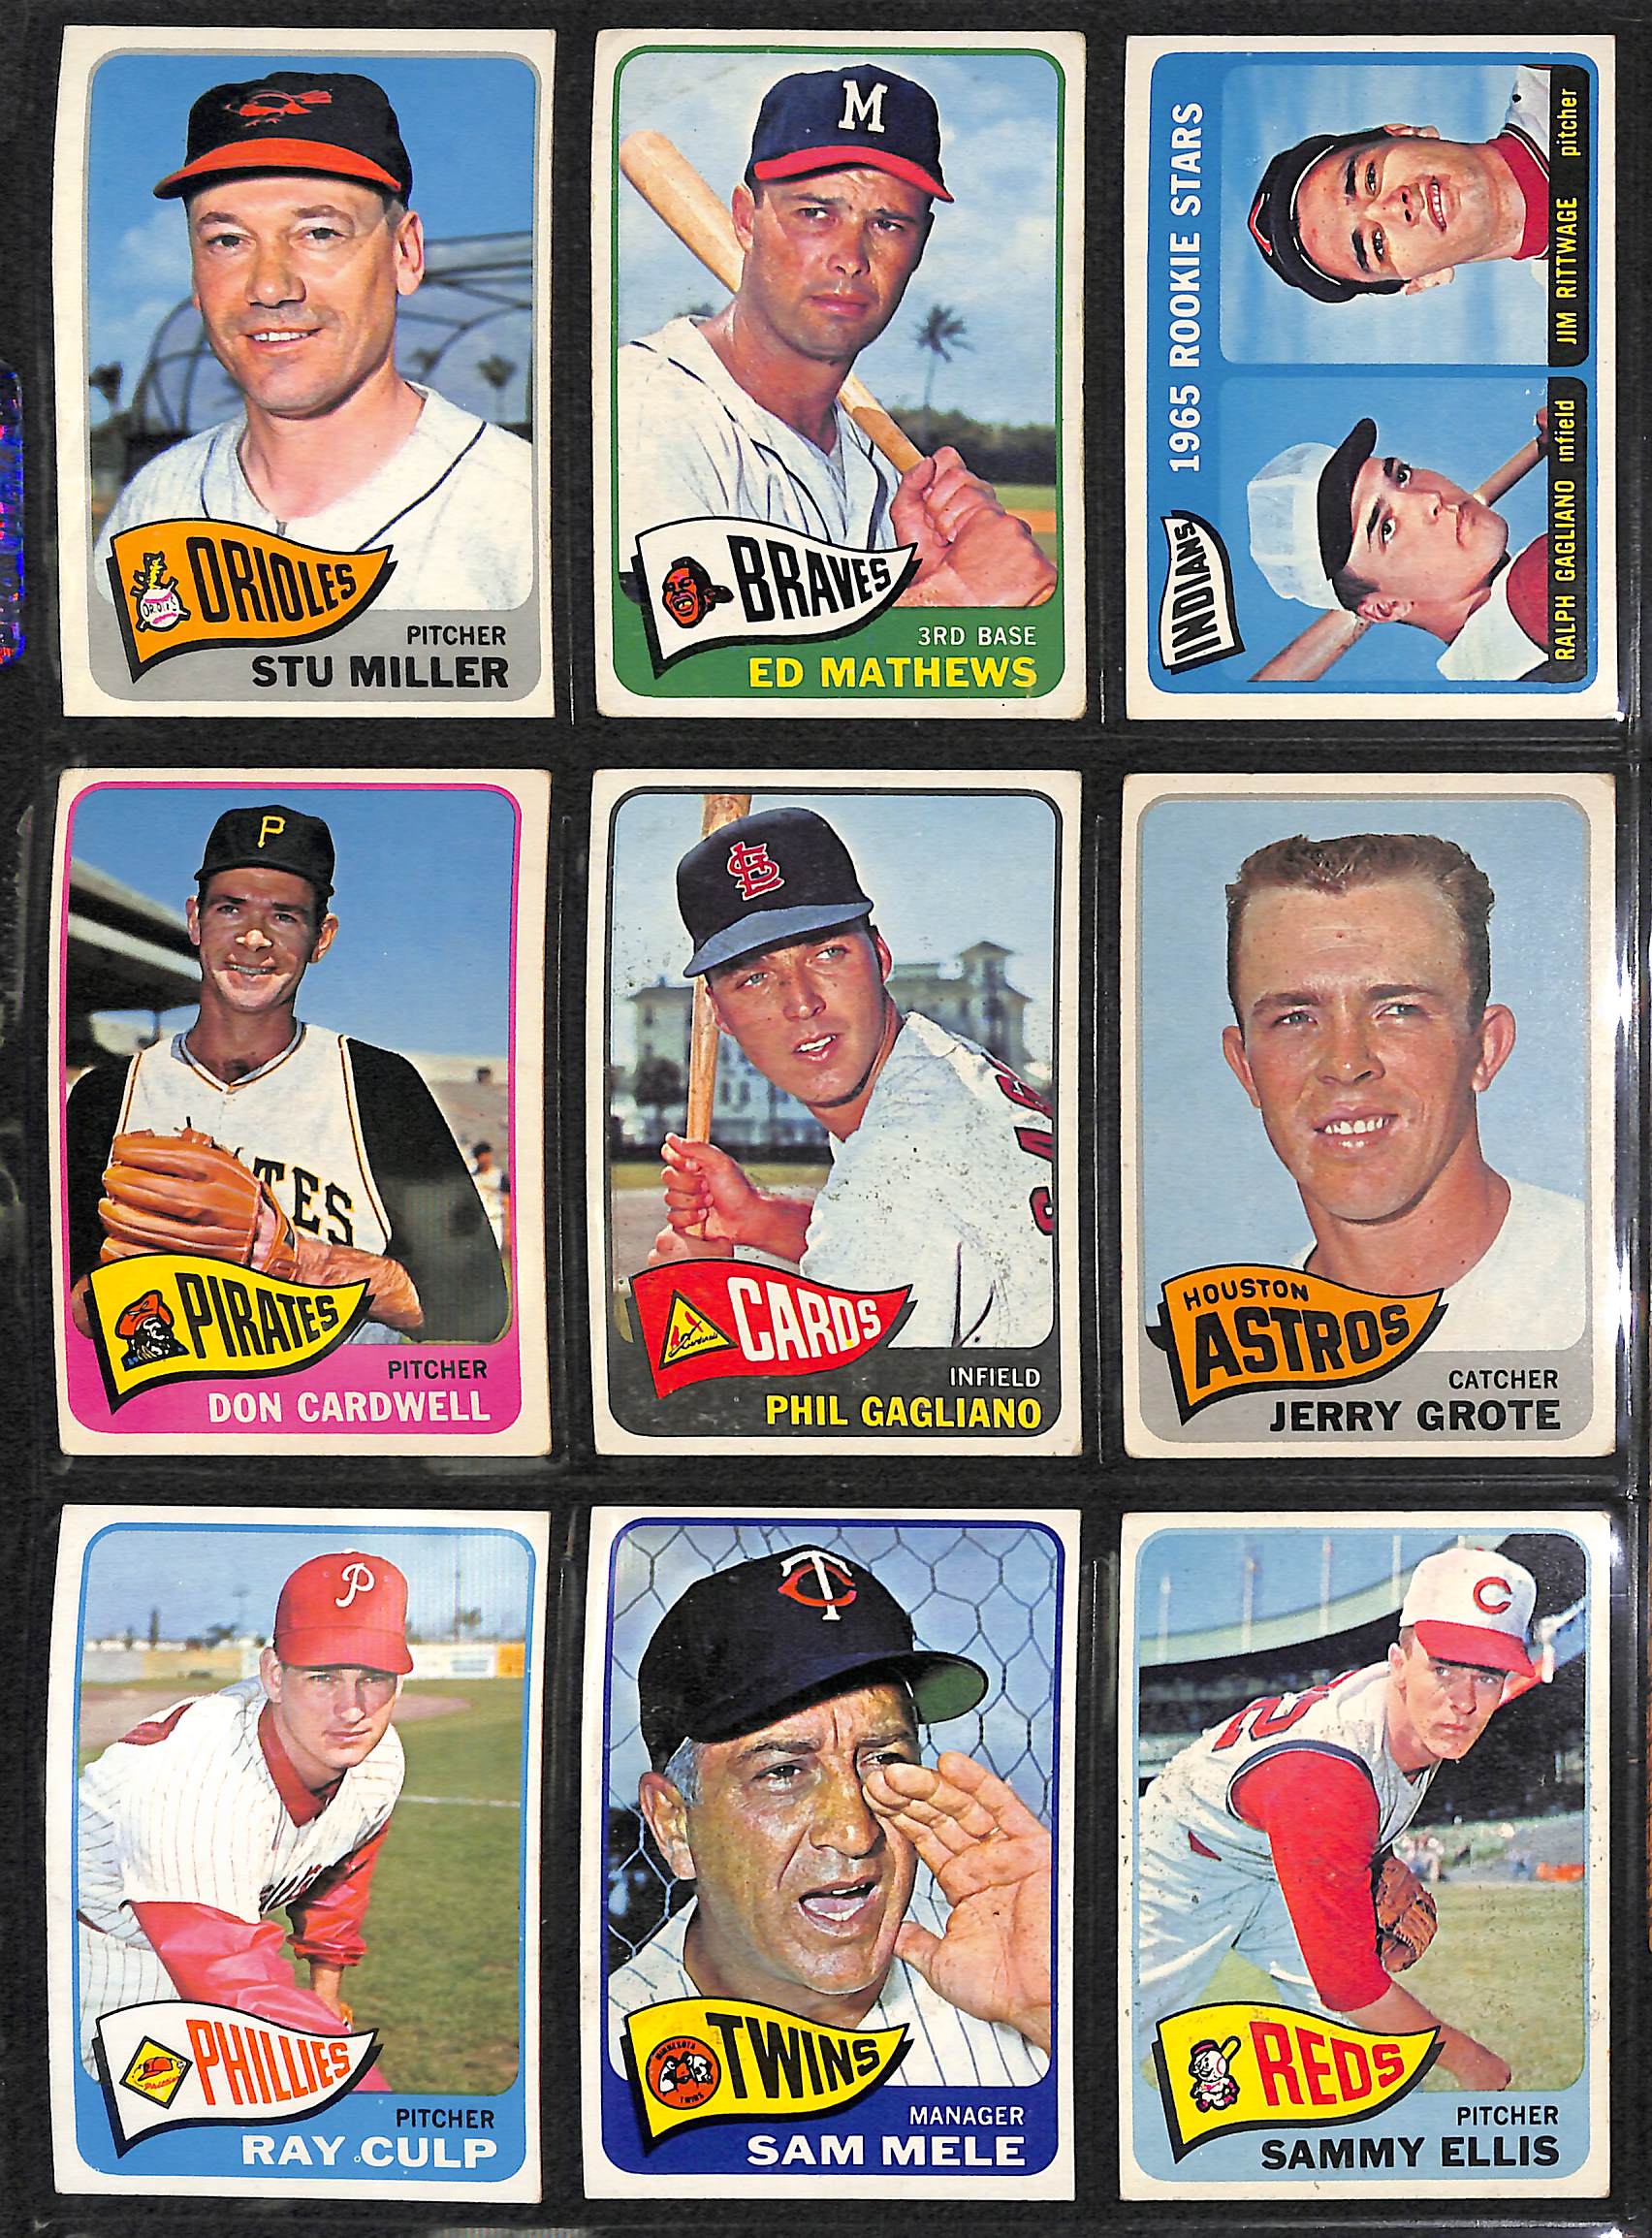 1965 Topps Baseball Cards / Lot Detail Lot Of 300 Different 1965